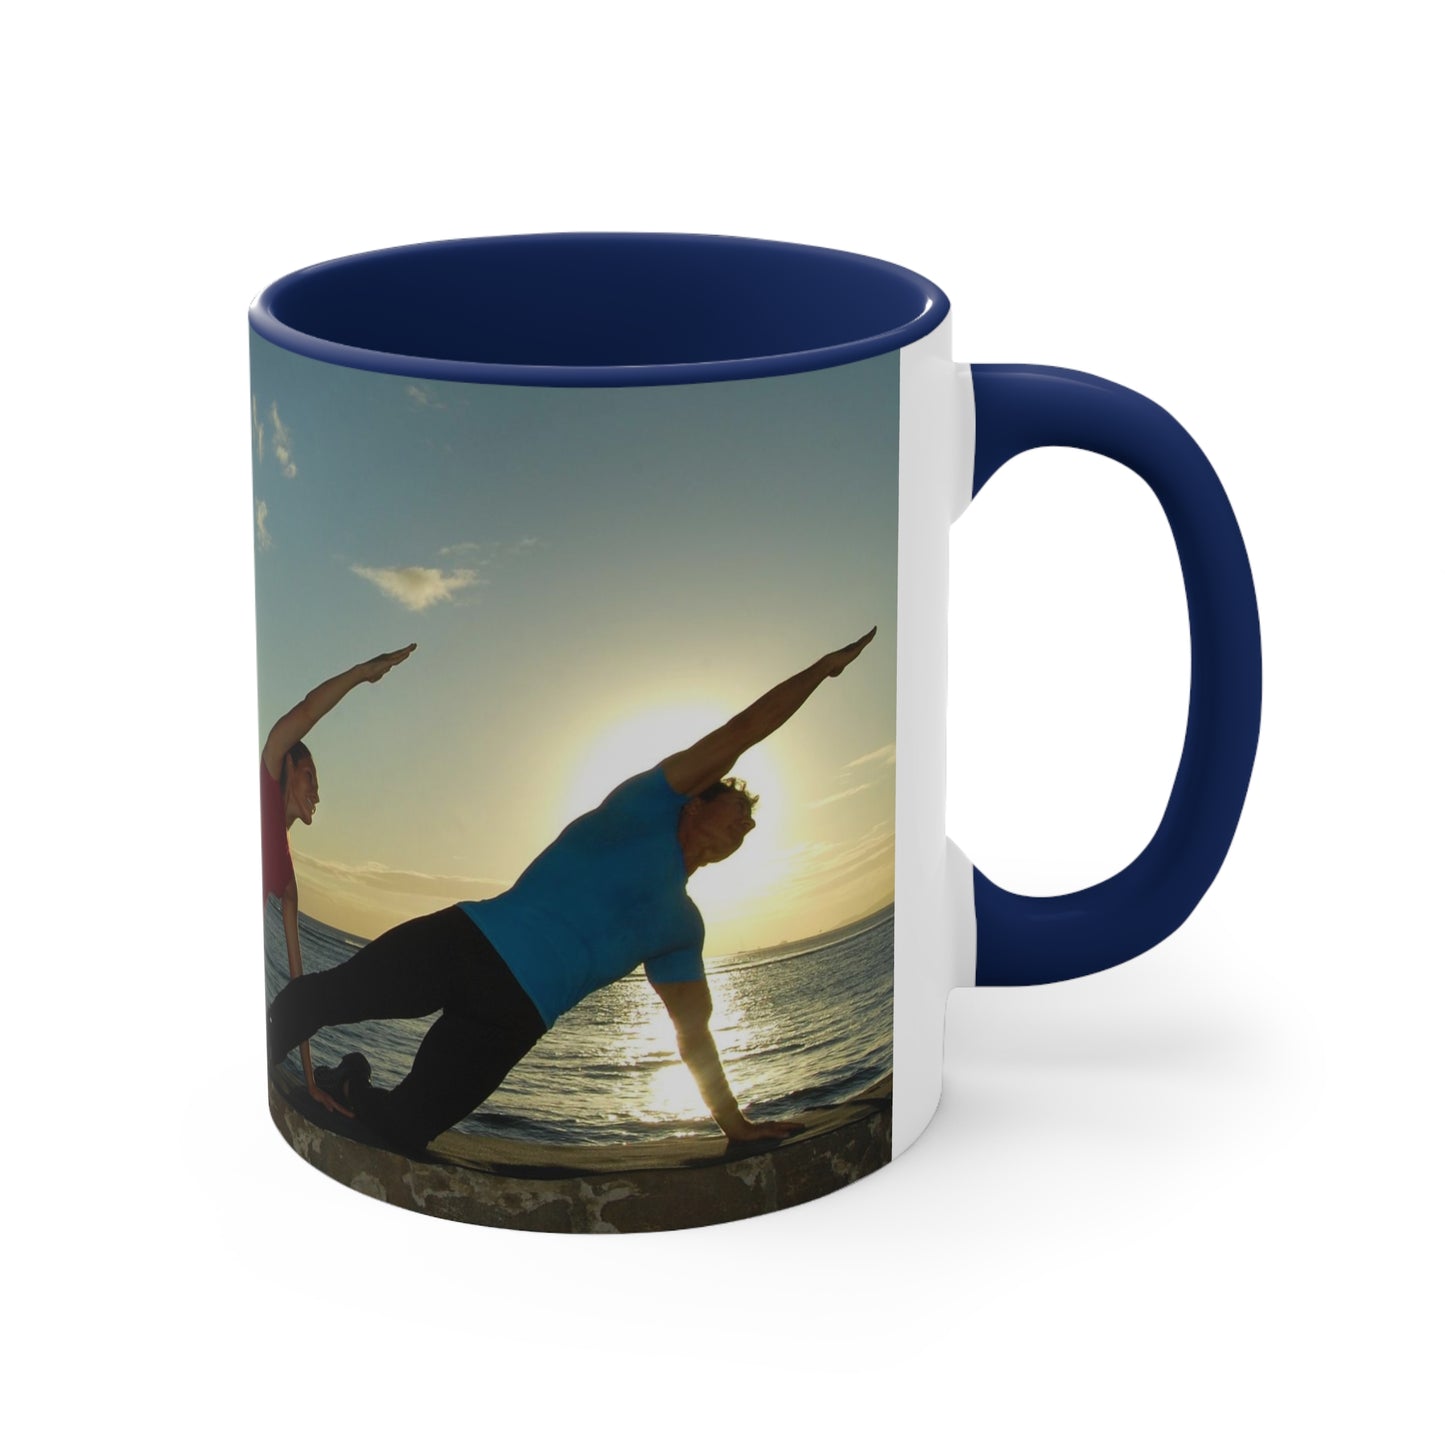 Gilad's Bodies in Motion Accent Coffee Mug, 11oz